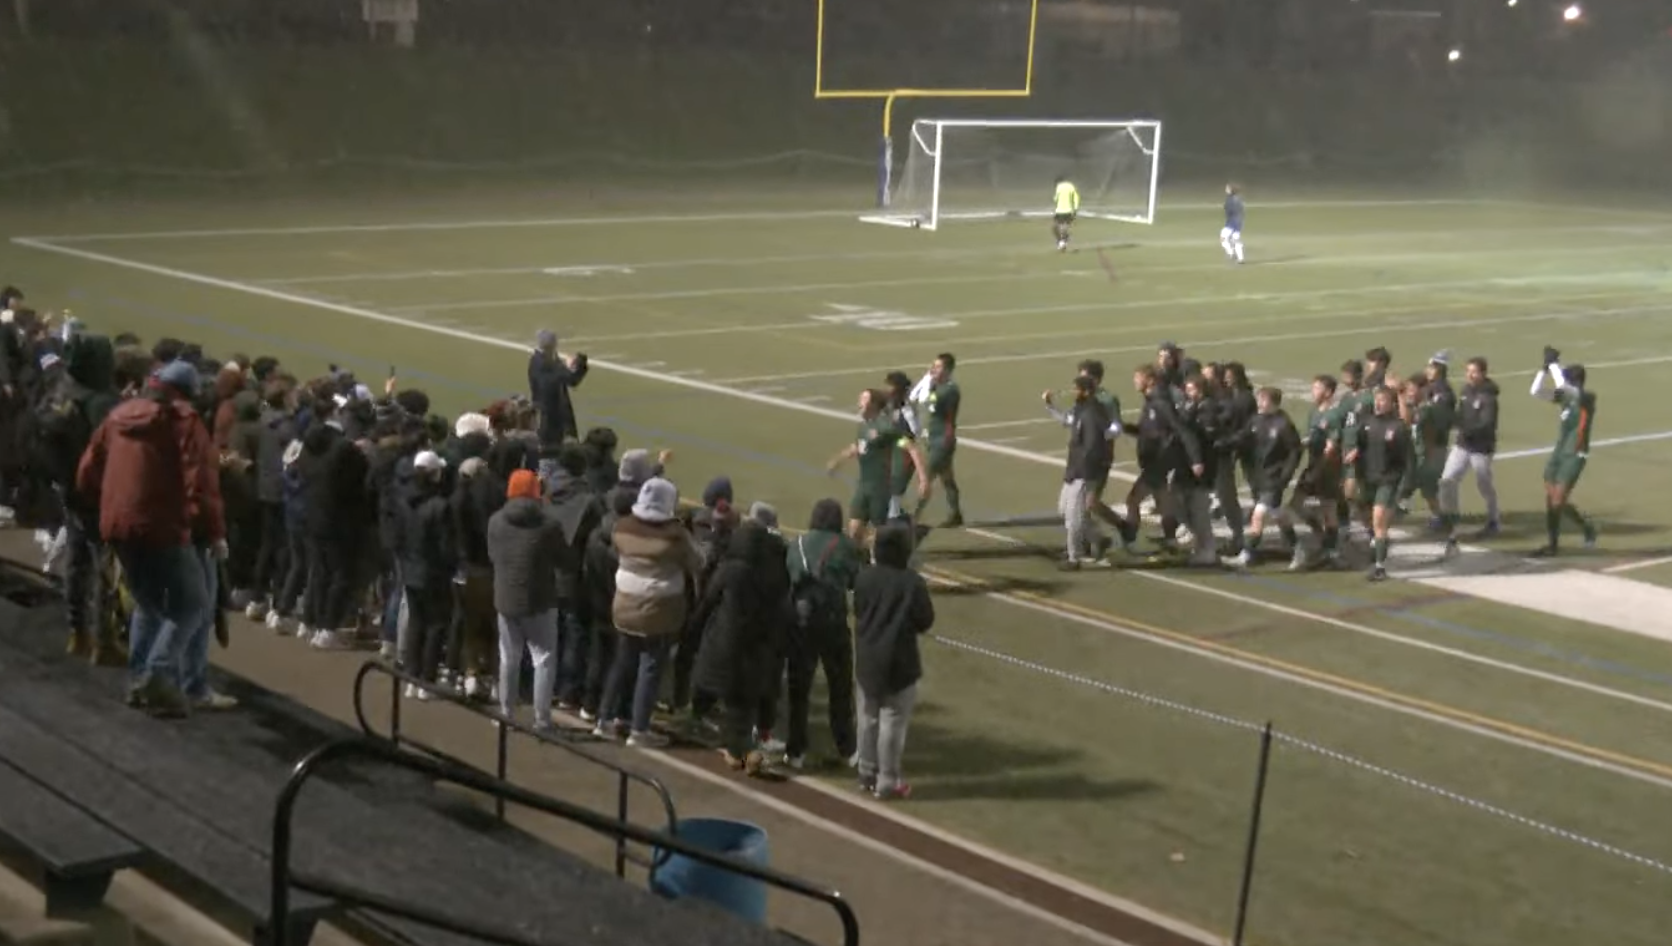 HHS boys soccer holds on to win state semifinal, 4-3